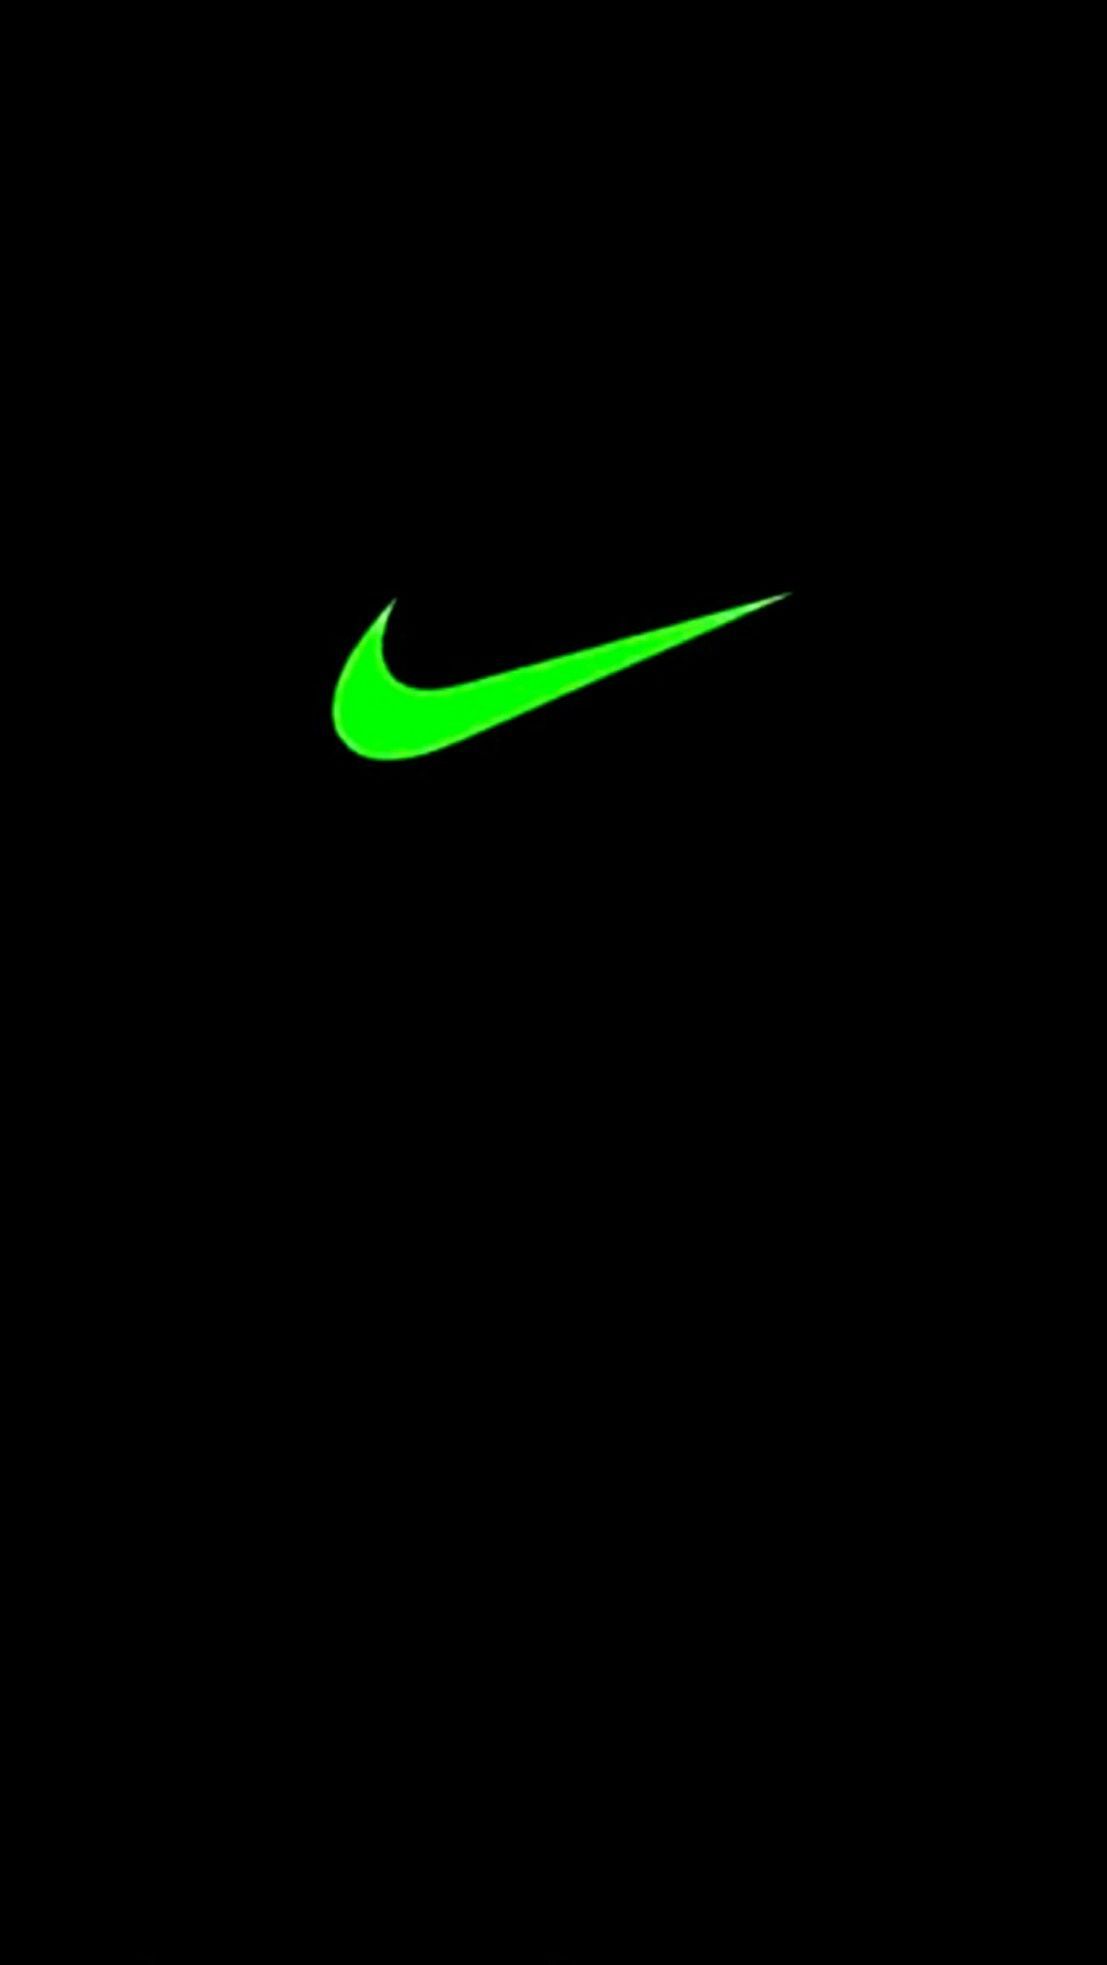 Wallpaper ID 443819  Products Nike Phone Wallpaper  750x1334 free  download